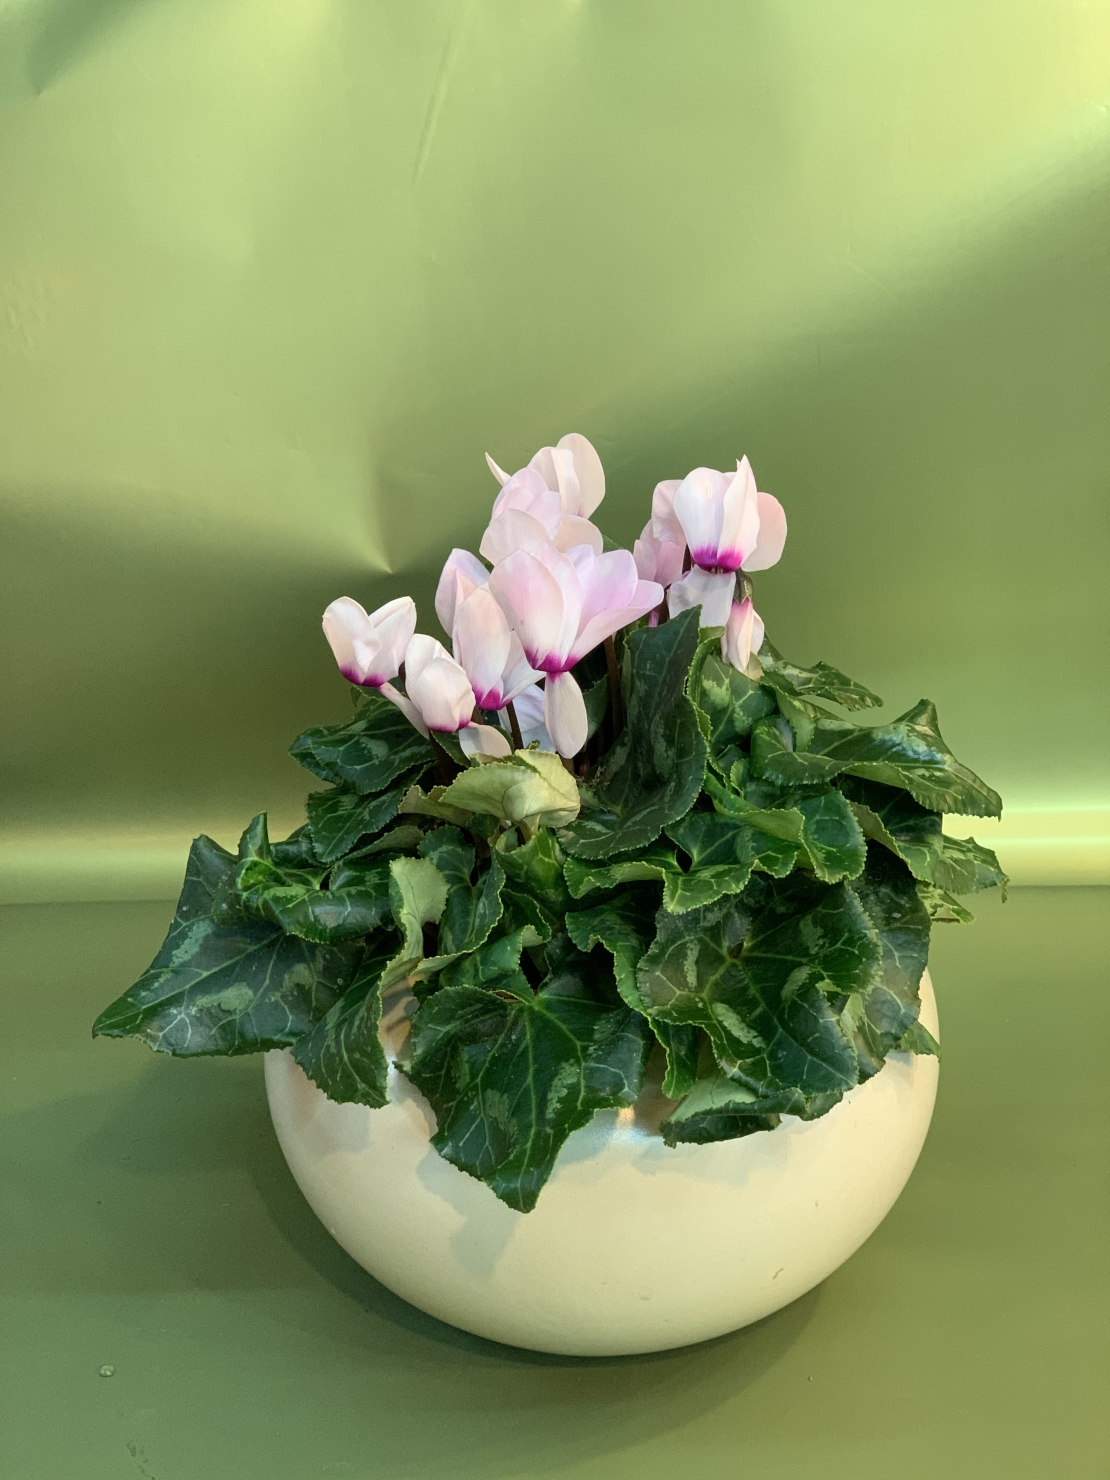 Cyclamen in a Variety of Colors, Flowerpot Included